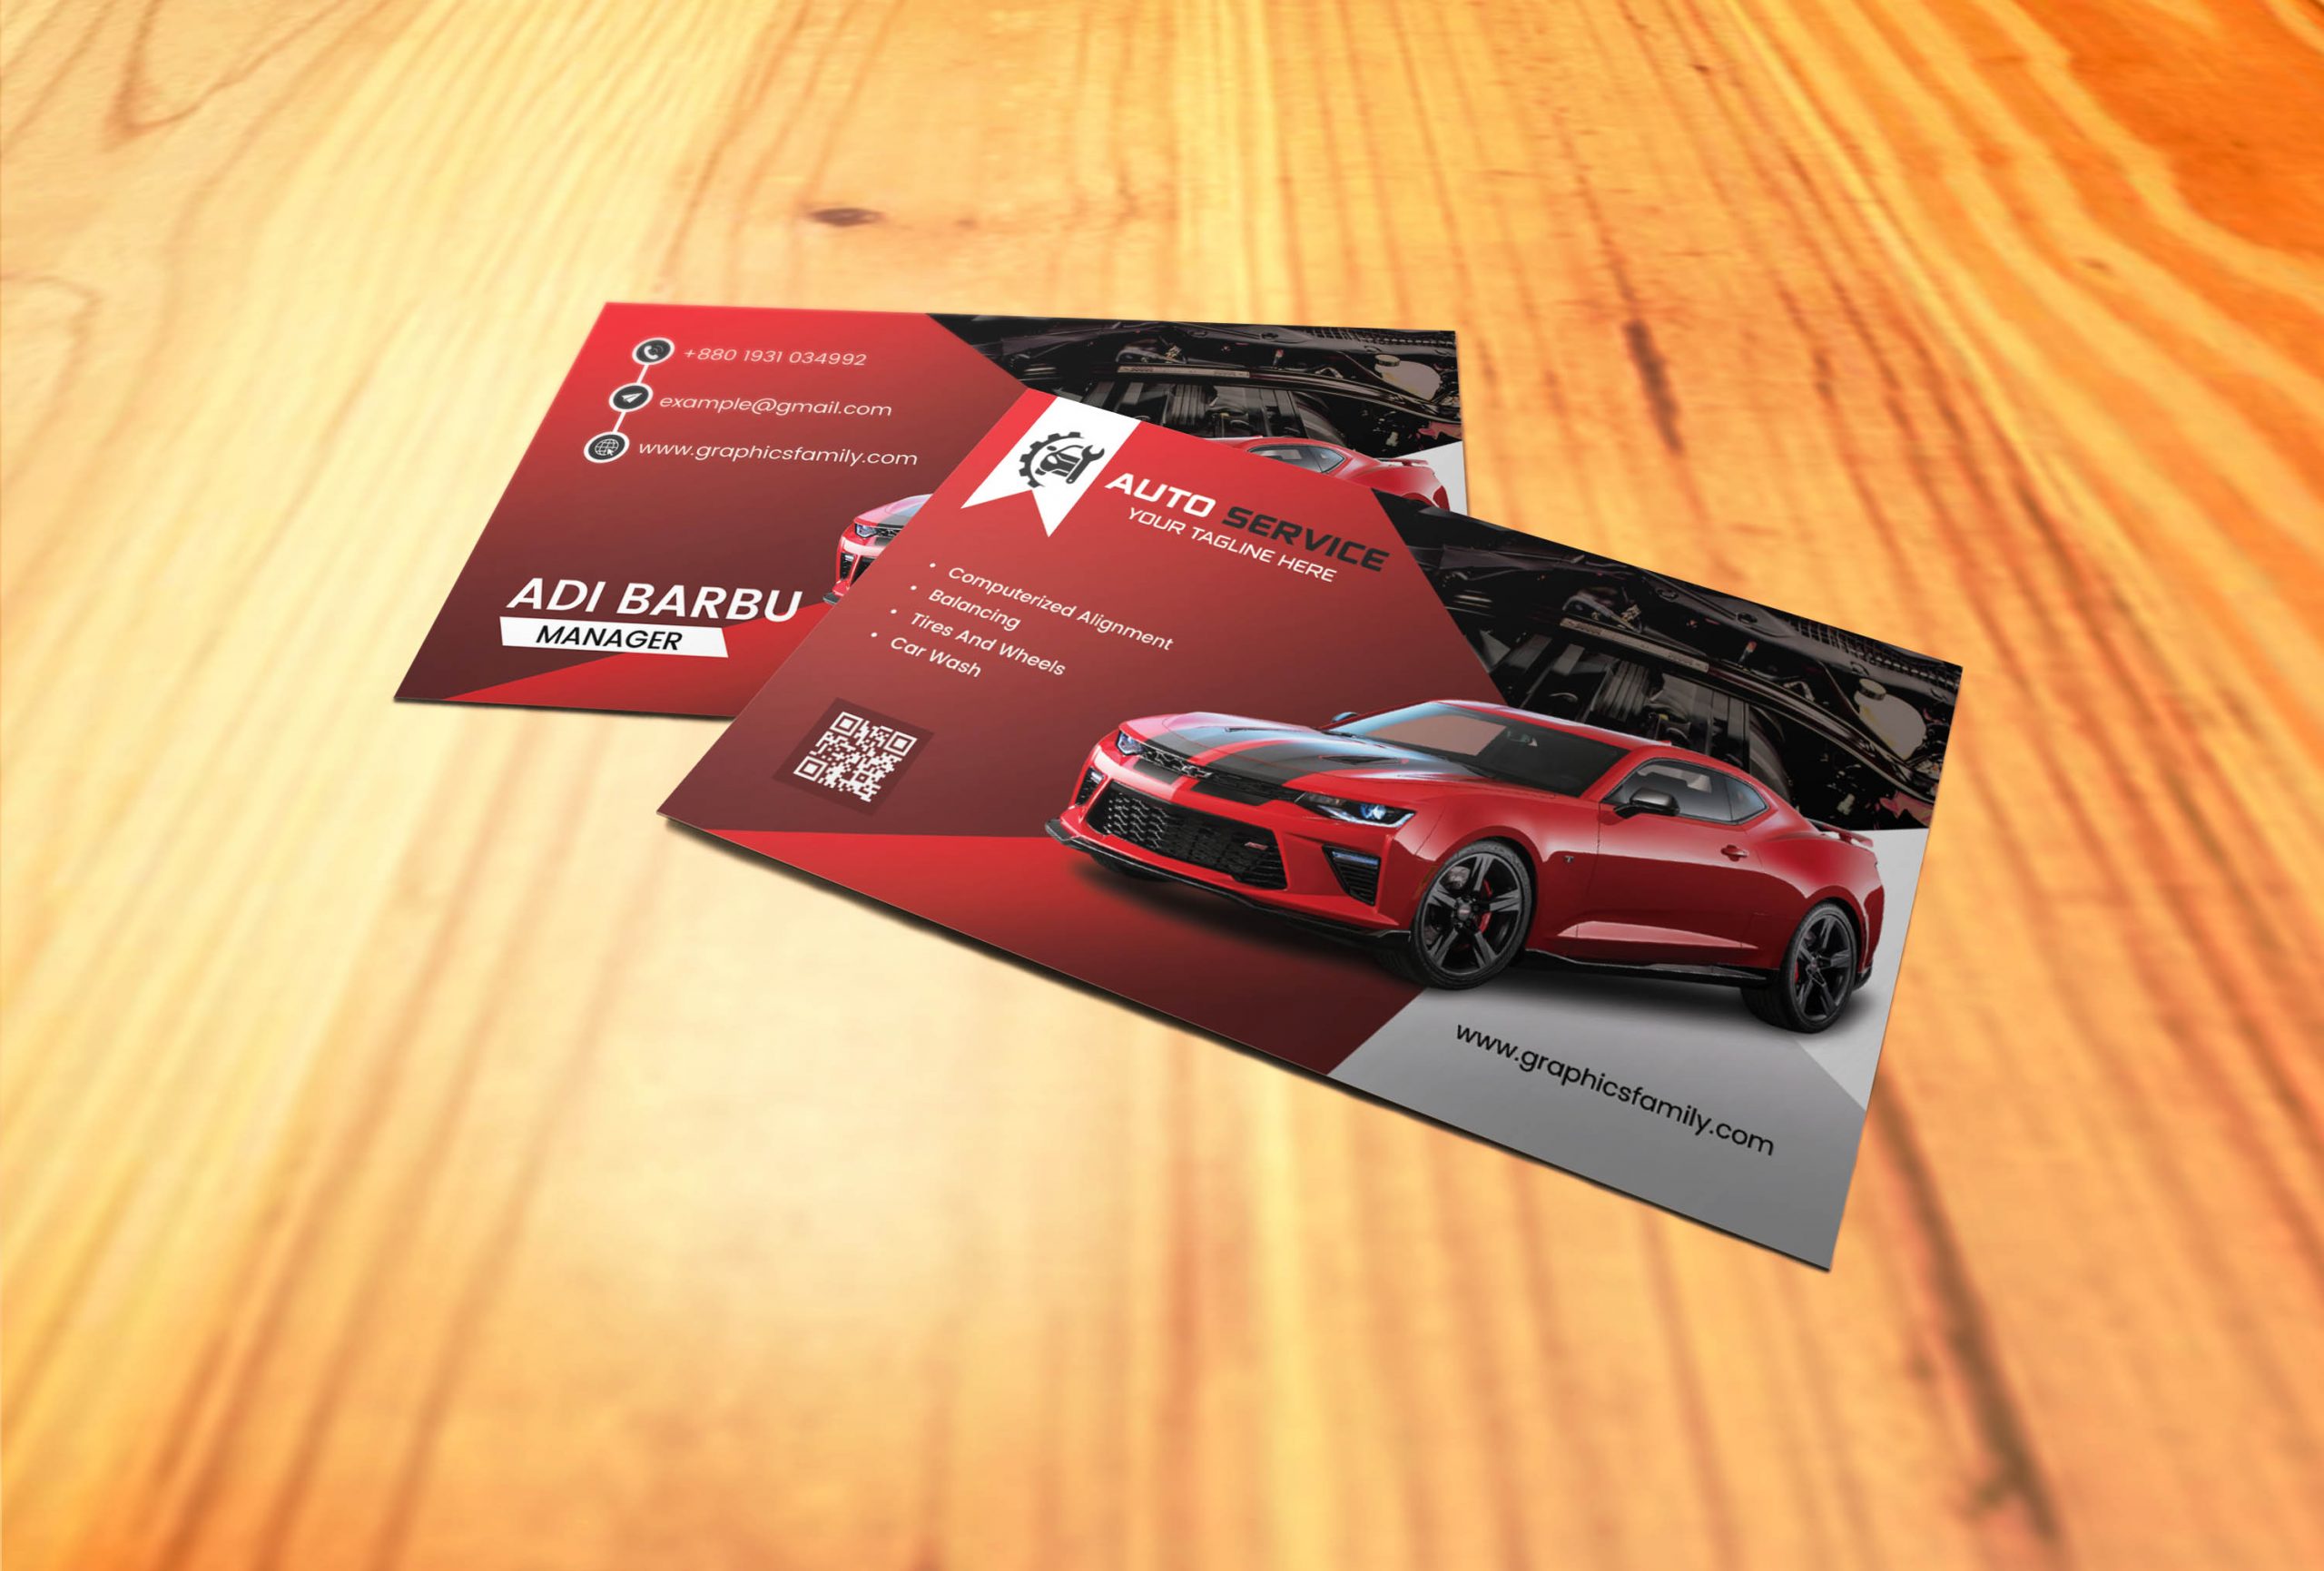 Free Download Auto Service Business Card Design Template